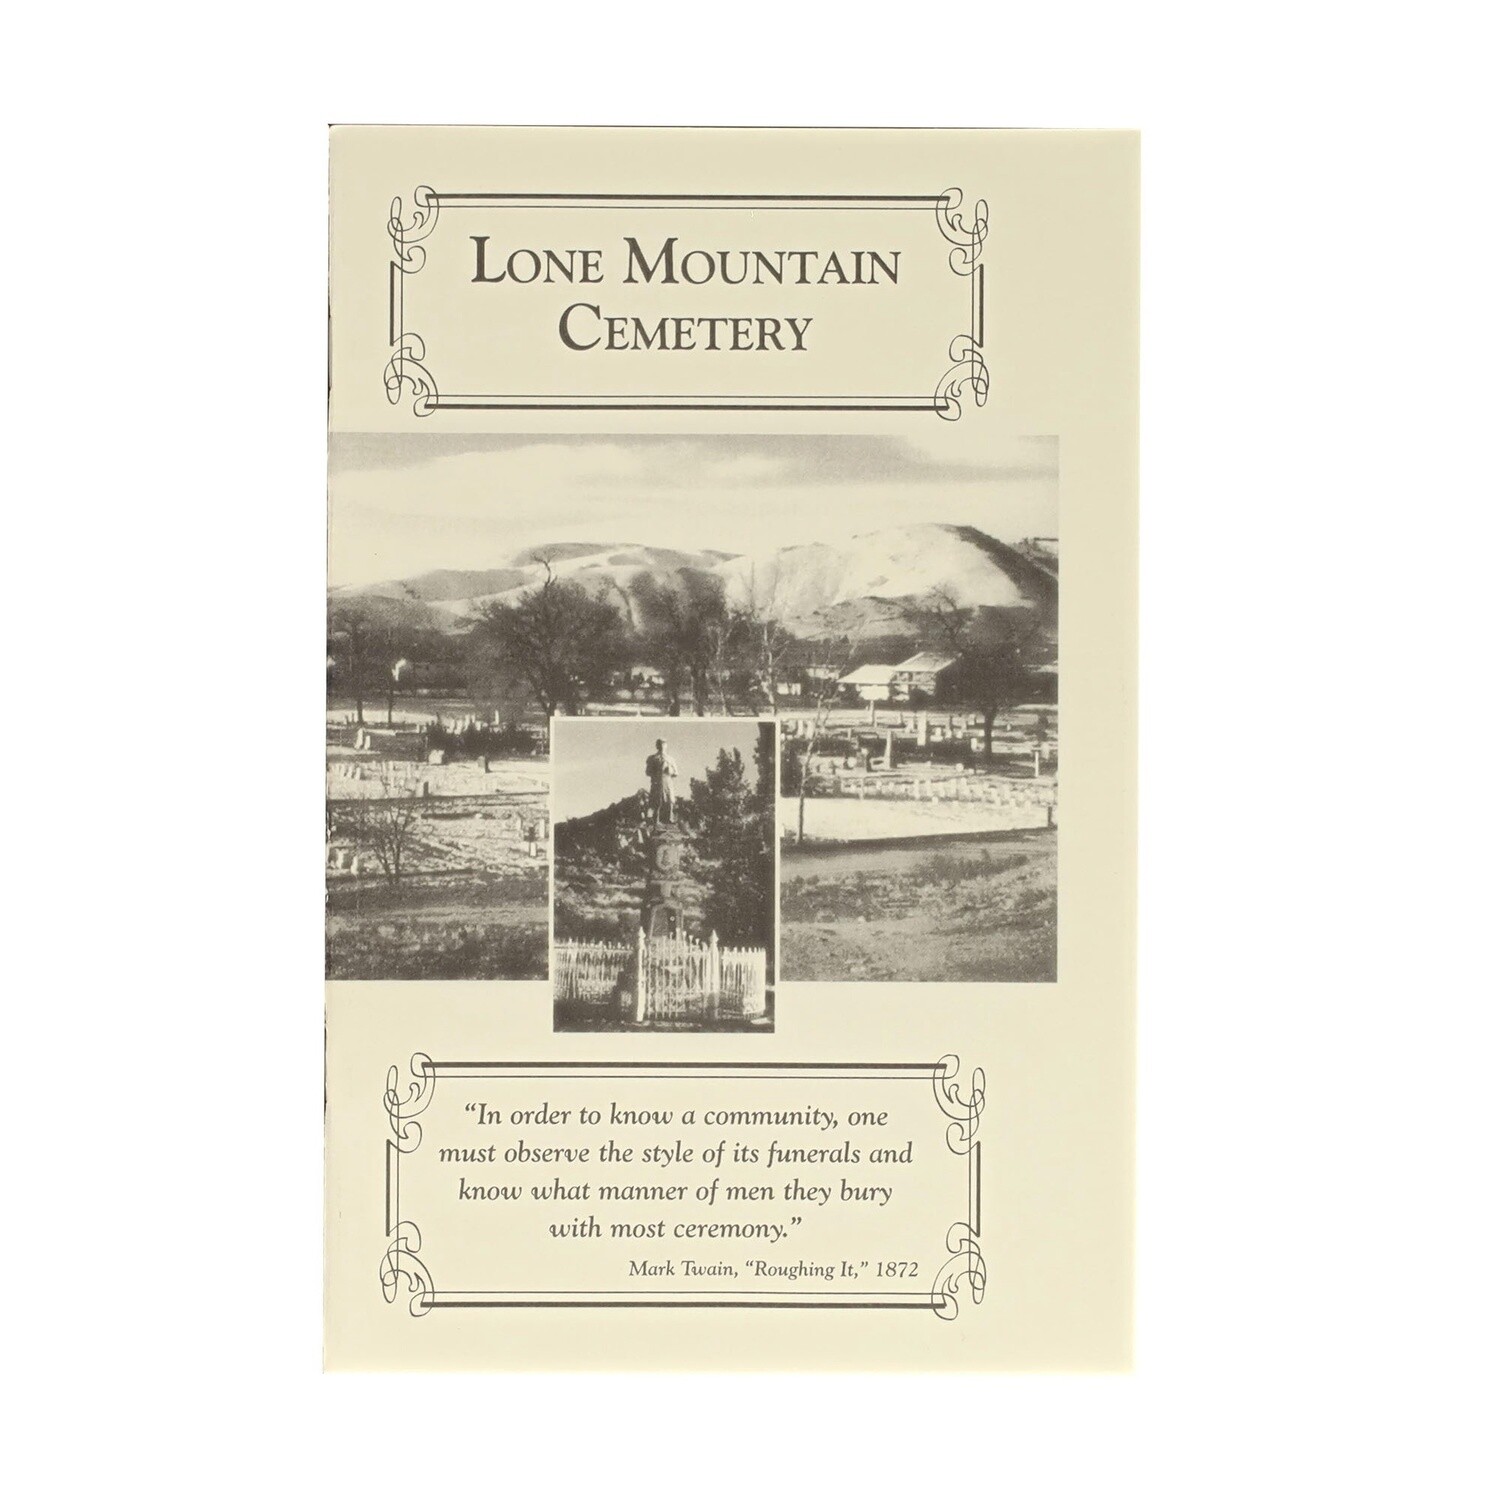 Lone Mountain Cemetery by Cindy E. Southerland